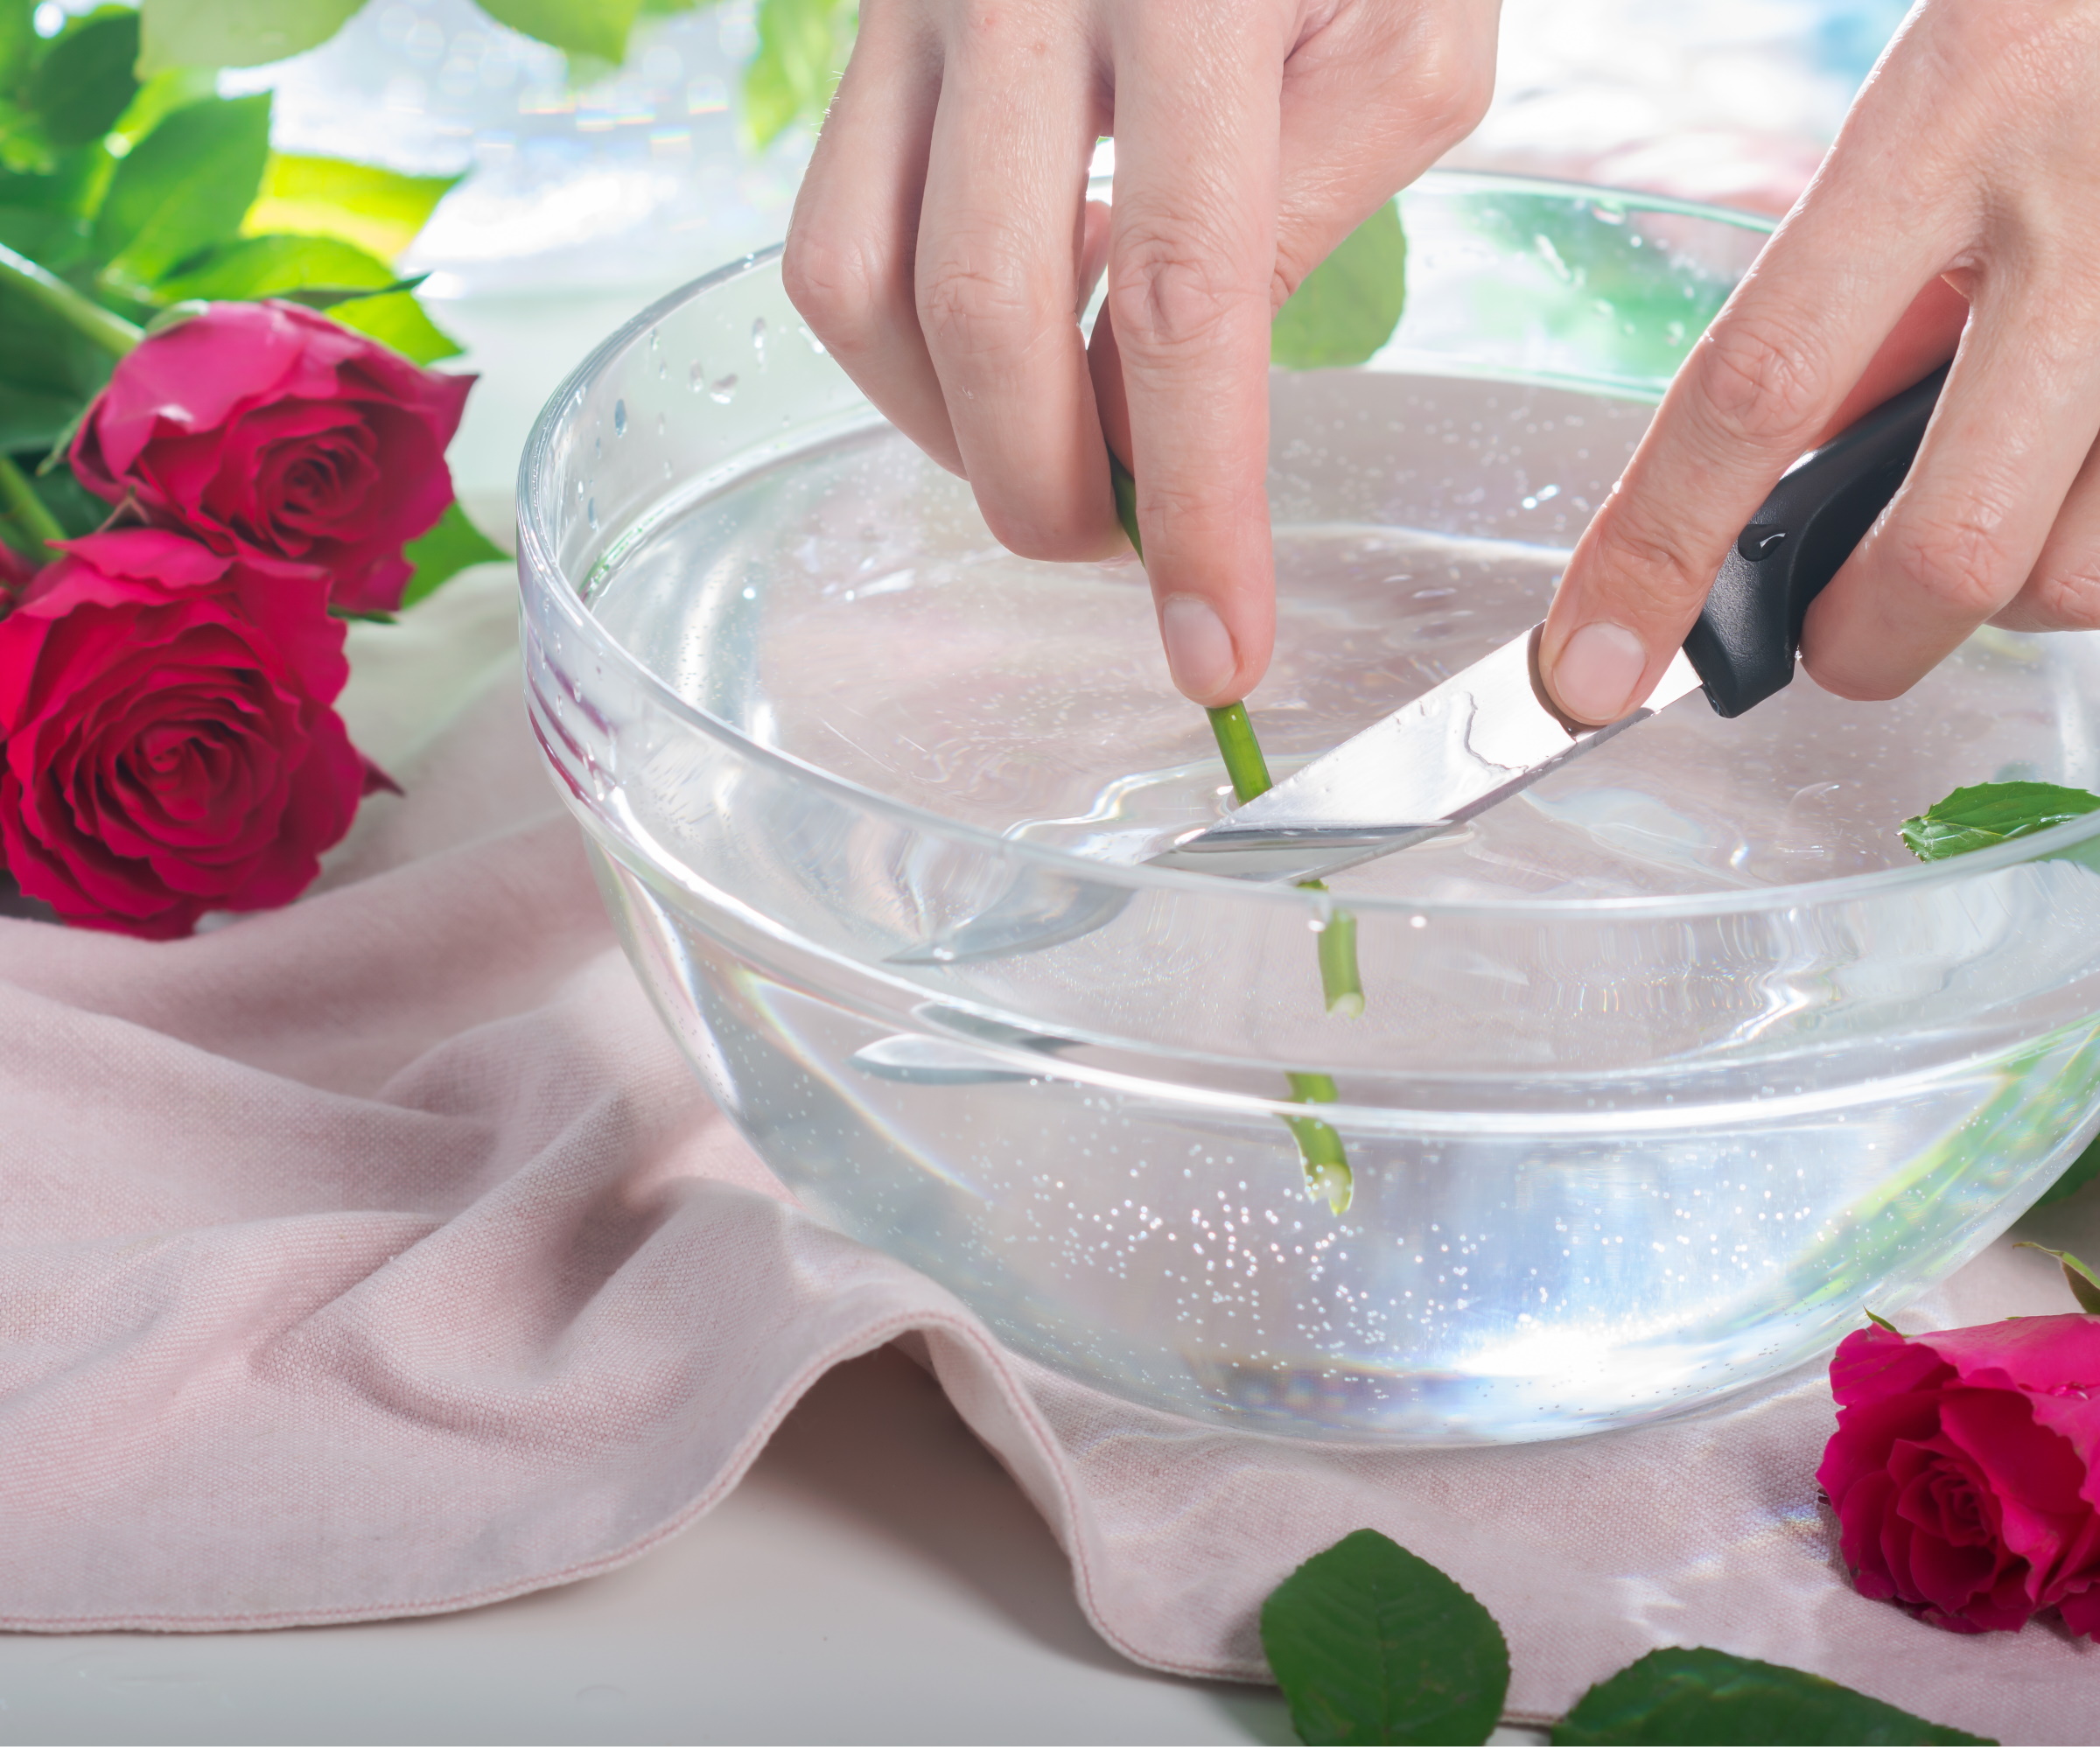 amazon, have you tried putting rose cuttings in water? experts say it's an easy way to multiply your flowers